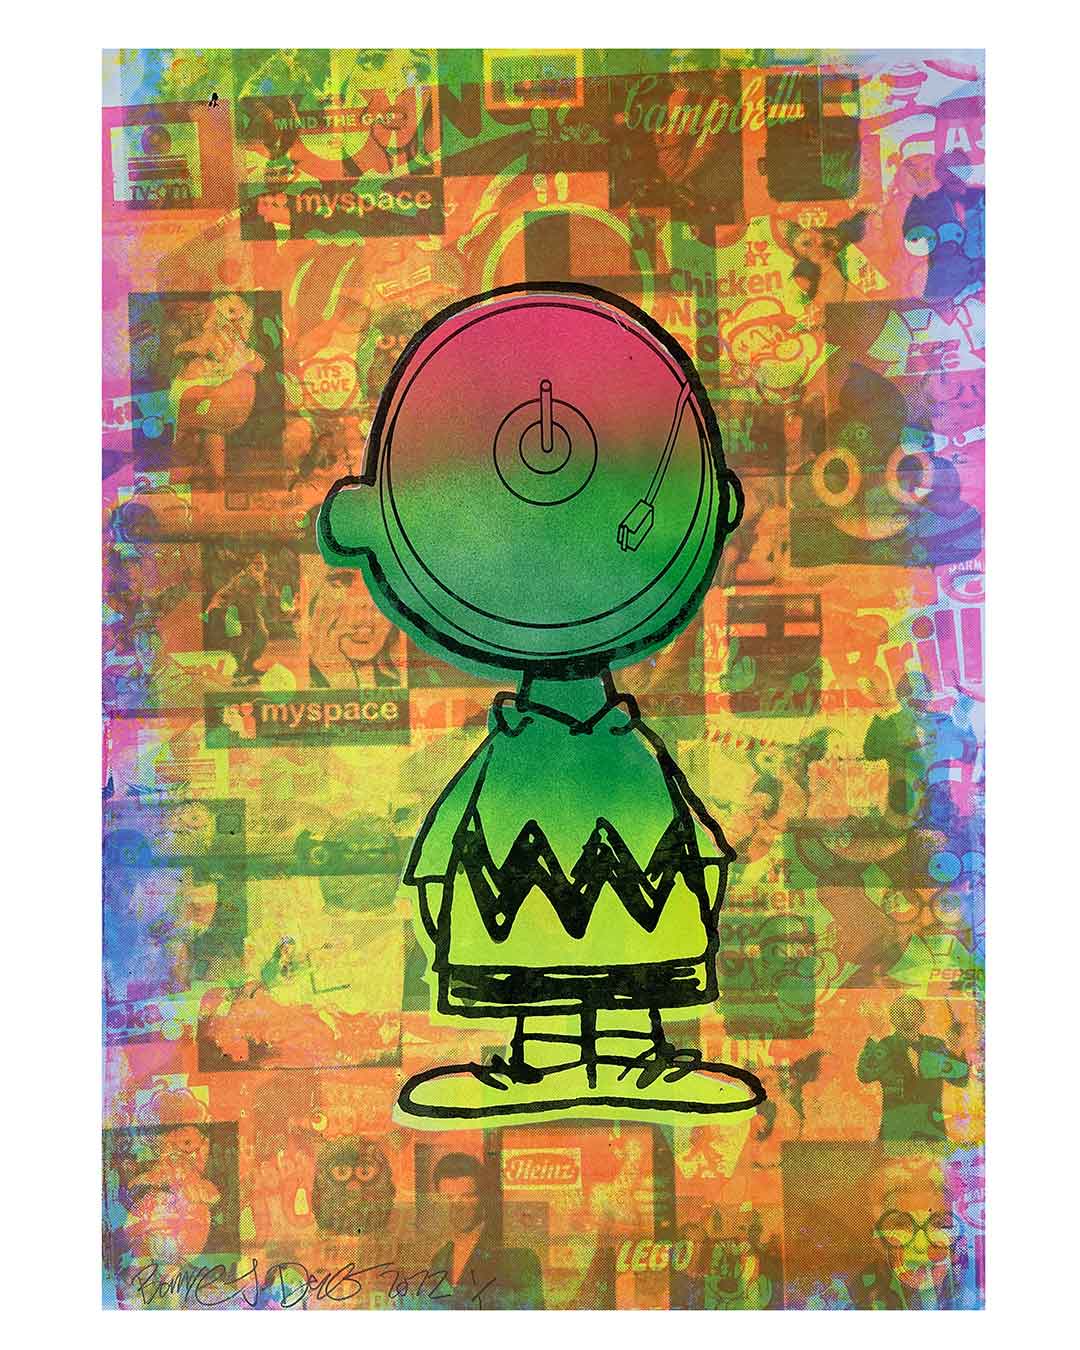 Charlie Says Fade Print by Barrie J Davies 2022, unframed Silkscreen print on paper (hand finished) edition of 1/1, A2 size 42cm x 59.4cm.